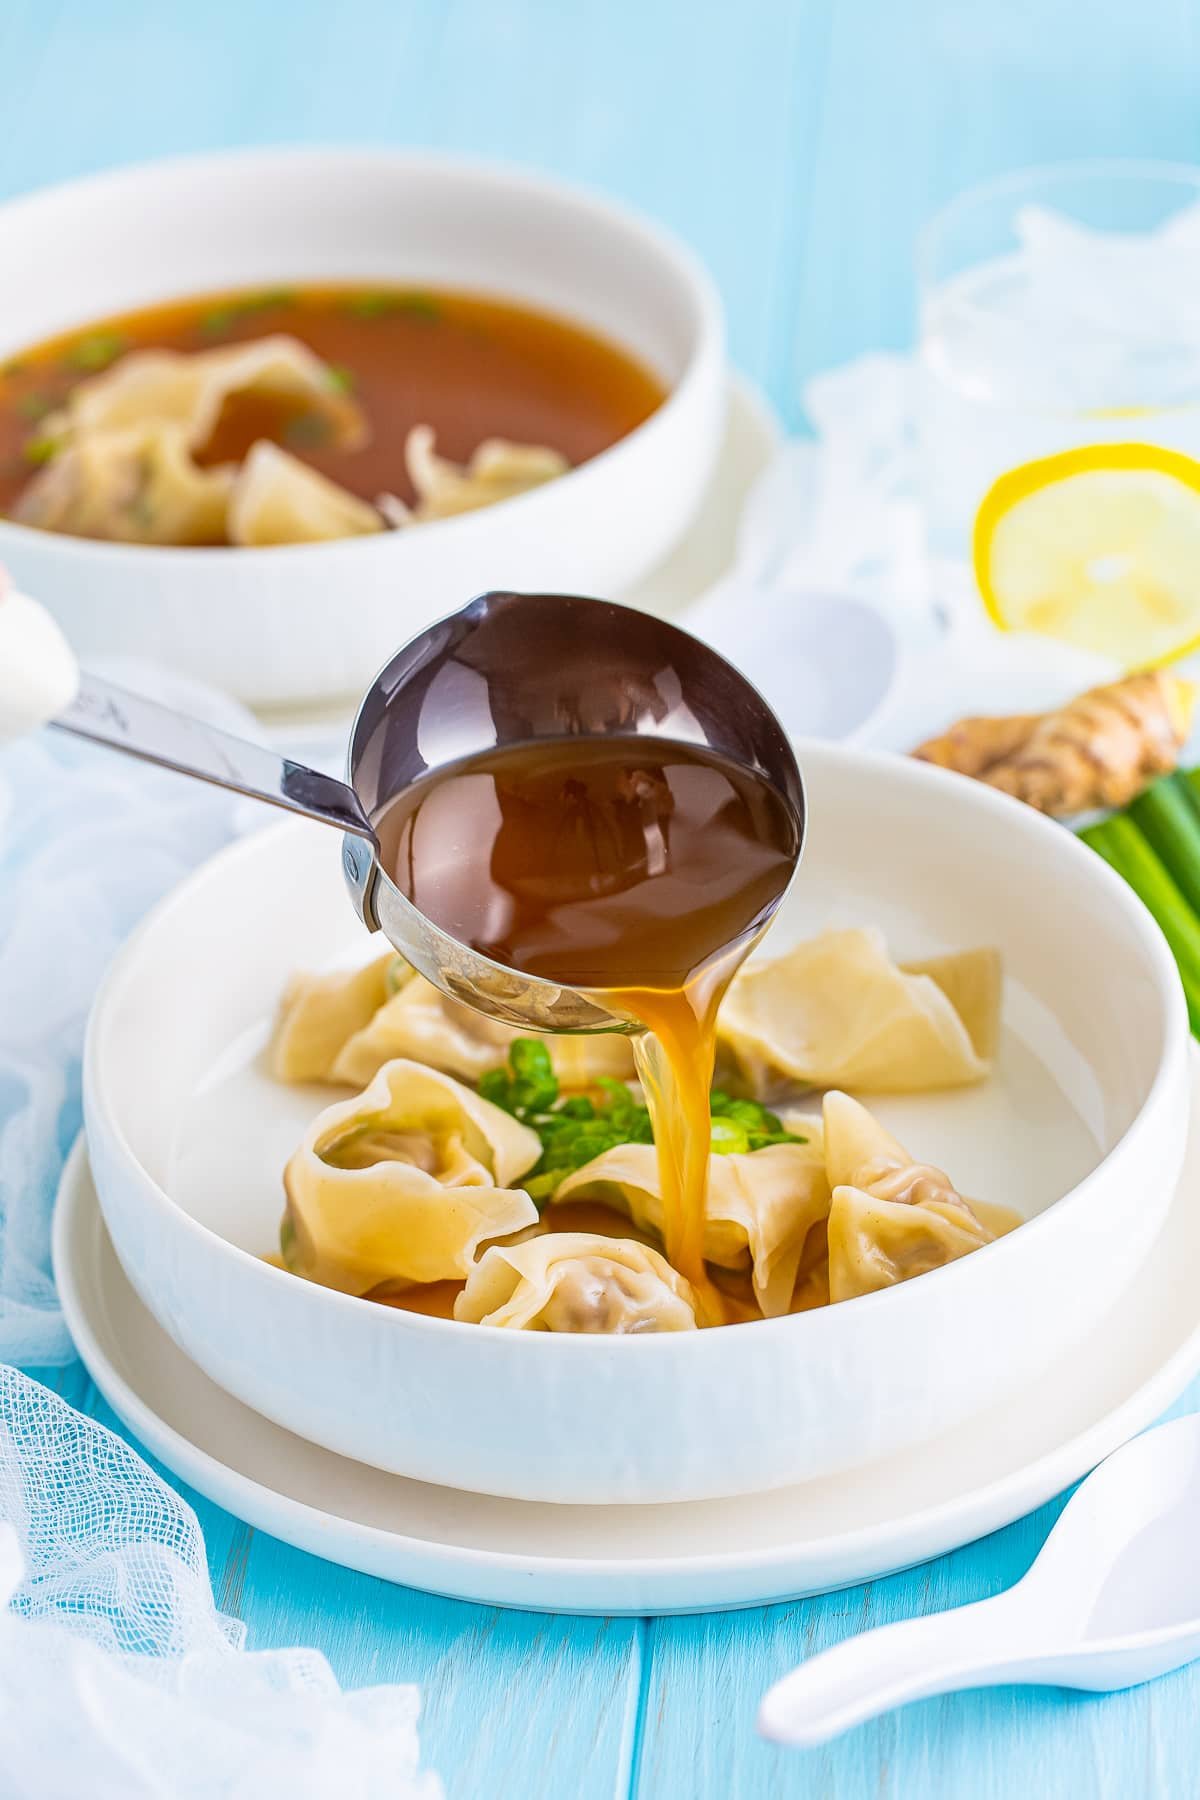 Wonton Soup Recipe showing the broth being poured into a white bowl over wontons with a bright blue backdrop.